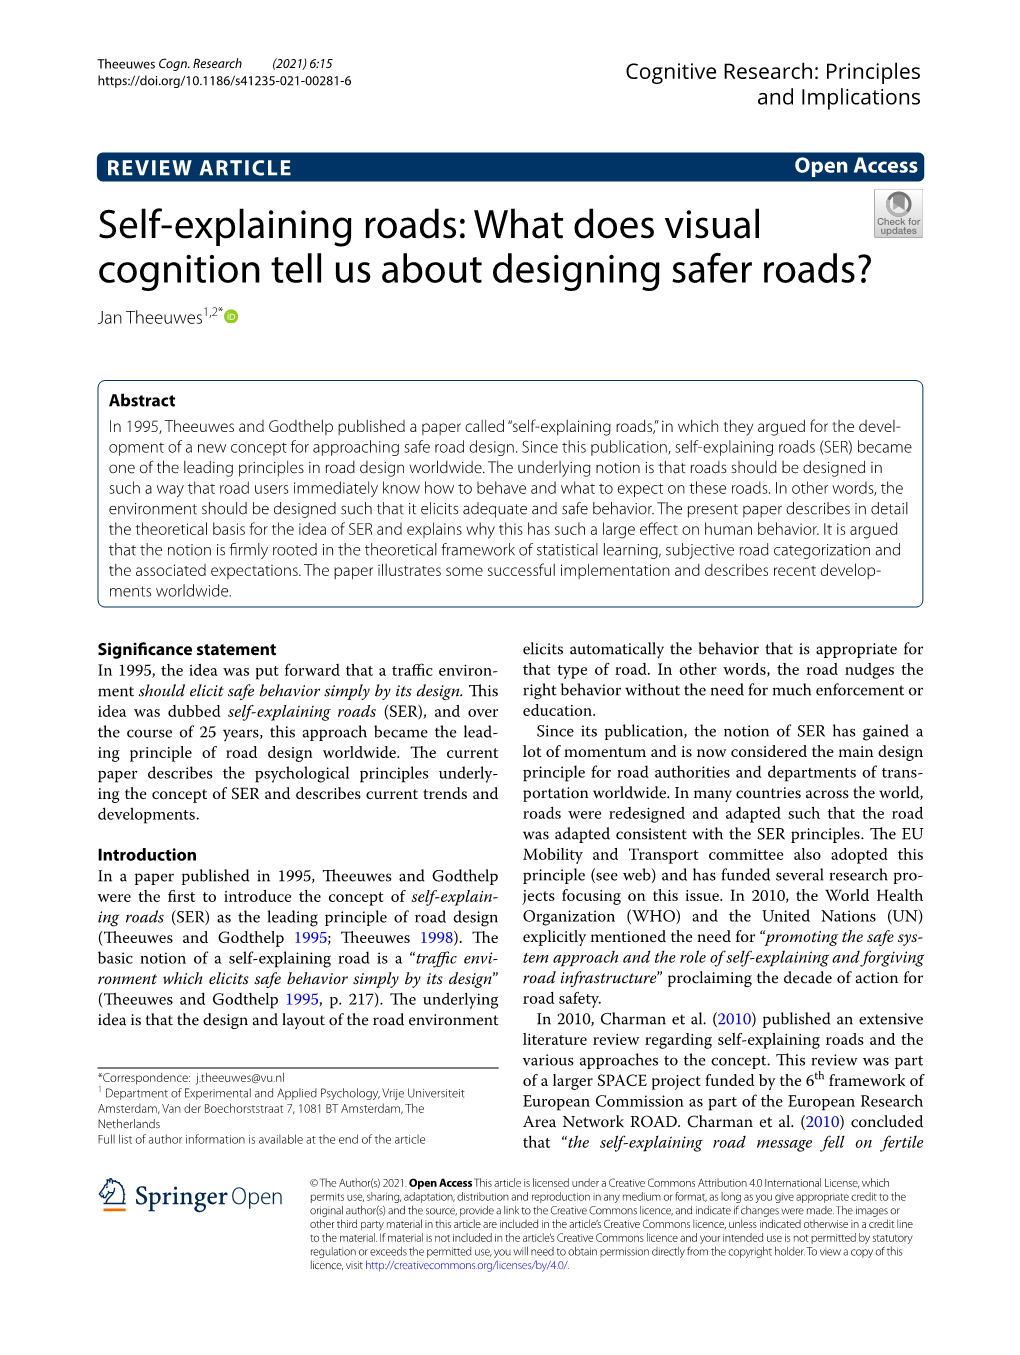 Self-Explaining Roads,” in Which They Argued for the Devel- Opment of a New Concept for Approaching Safe Road Design